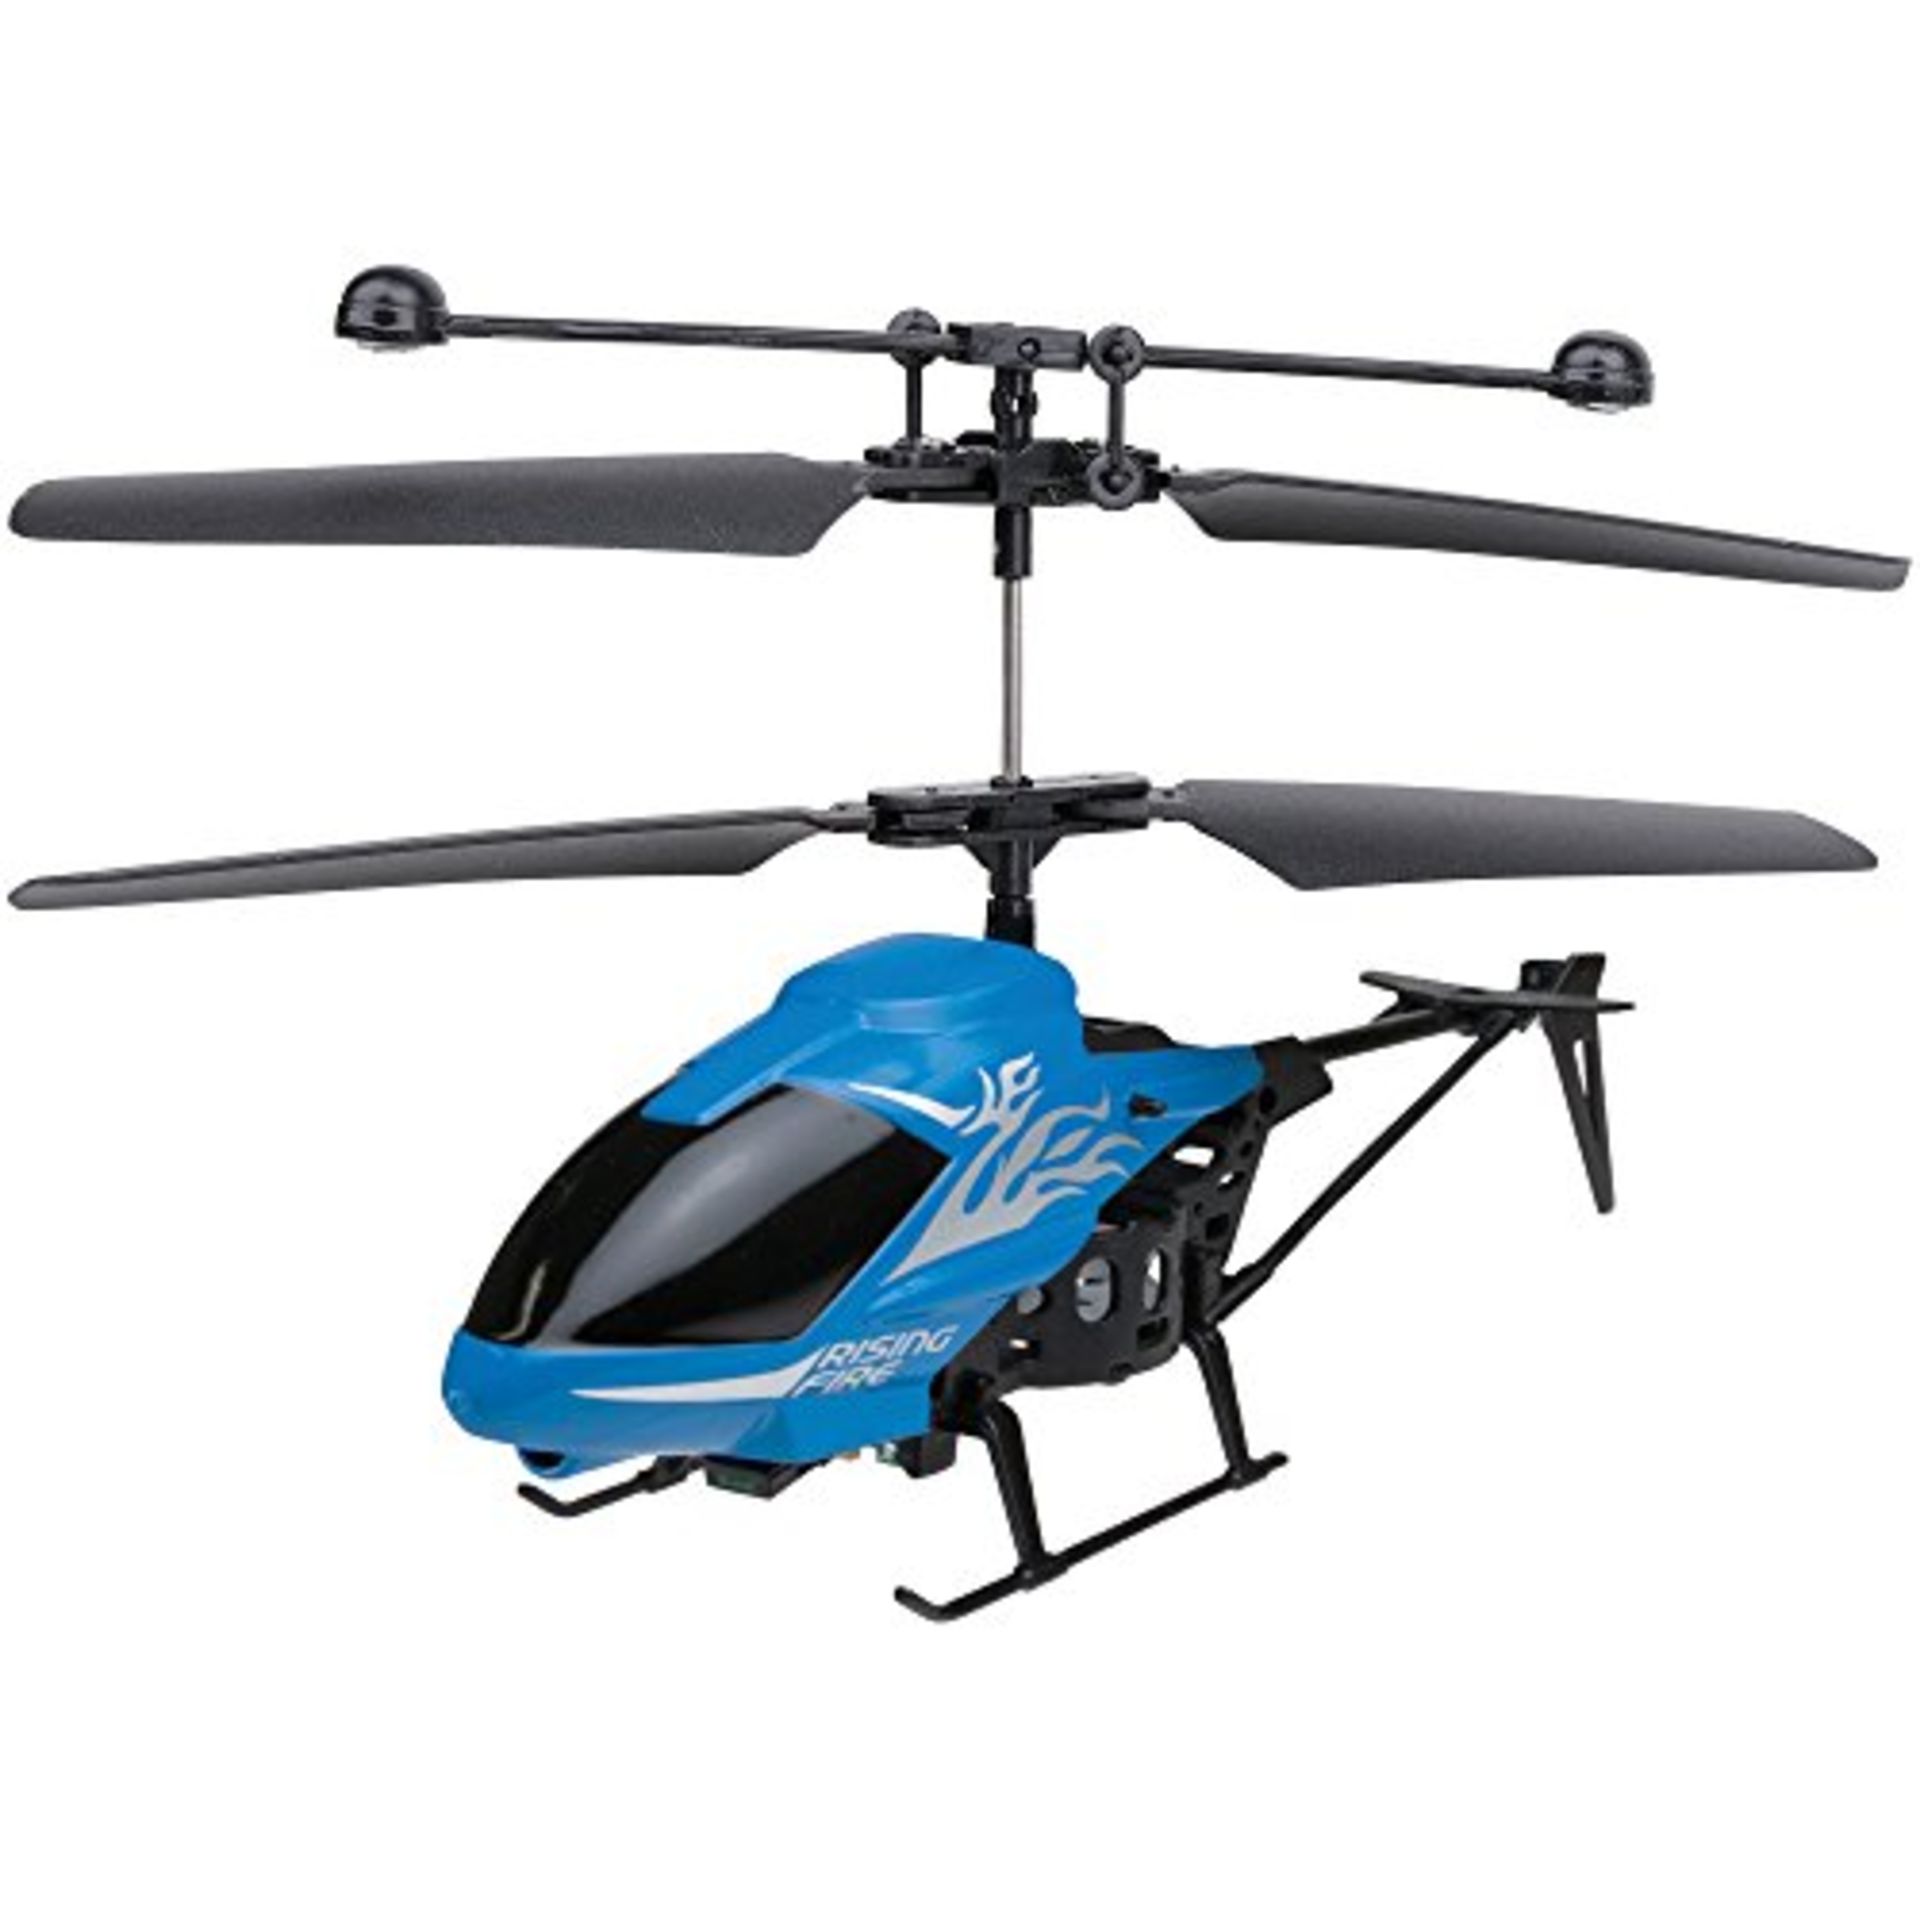 V *TRADE QTY* Brand New Interceptor X-20 Radio Controlled Helicopter Brand New Sealed Complete